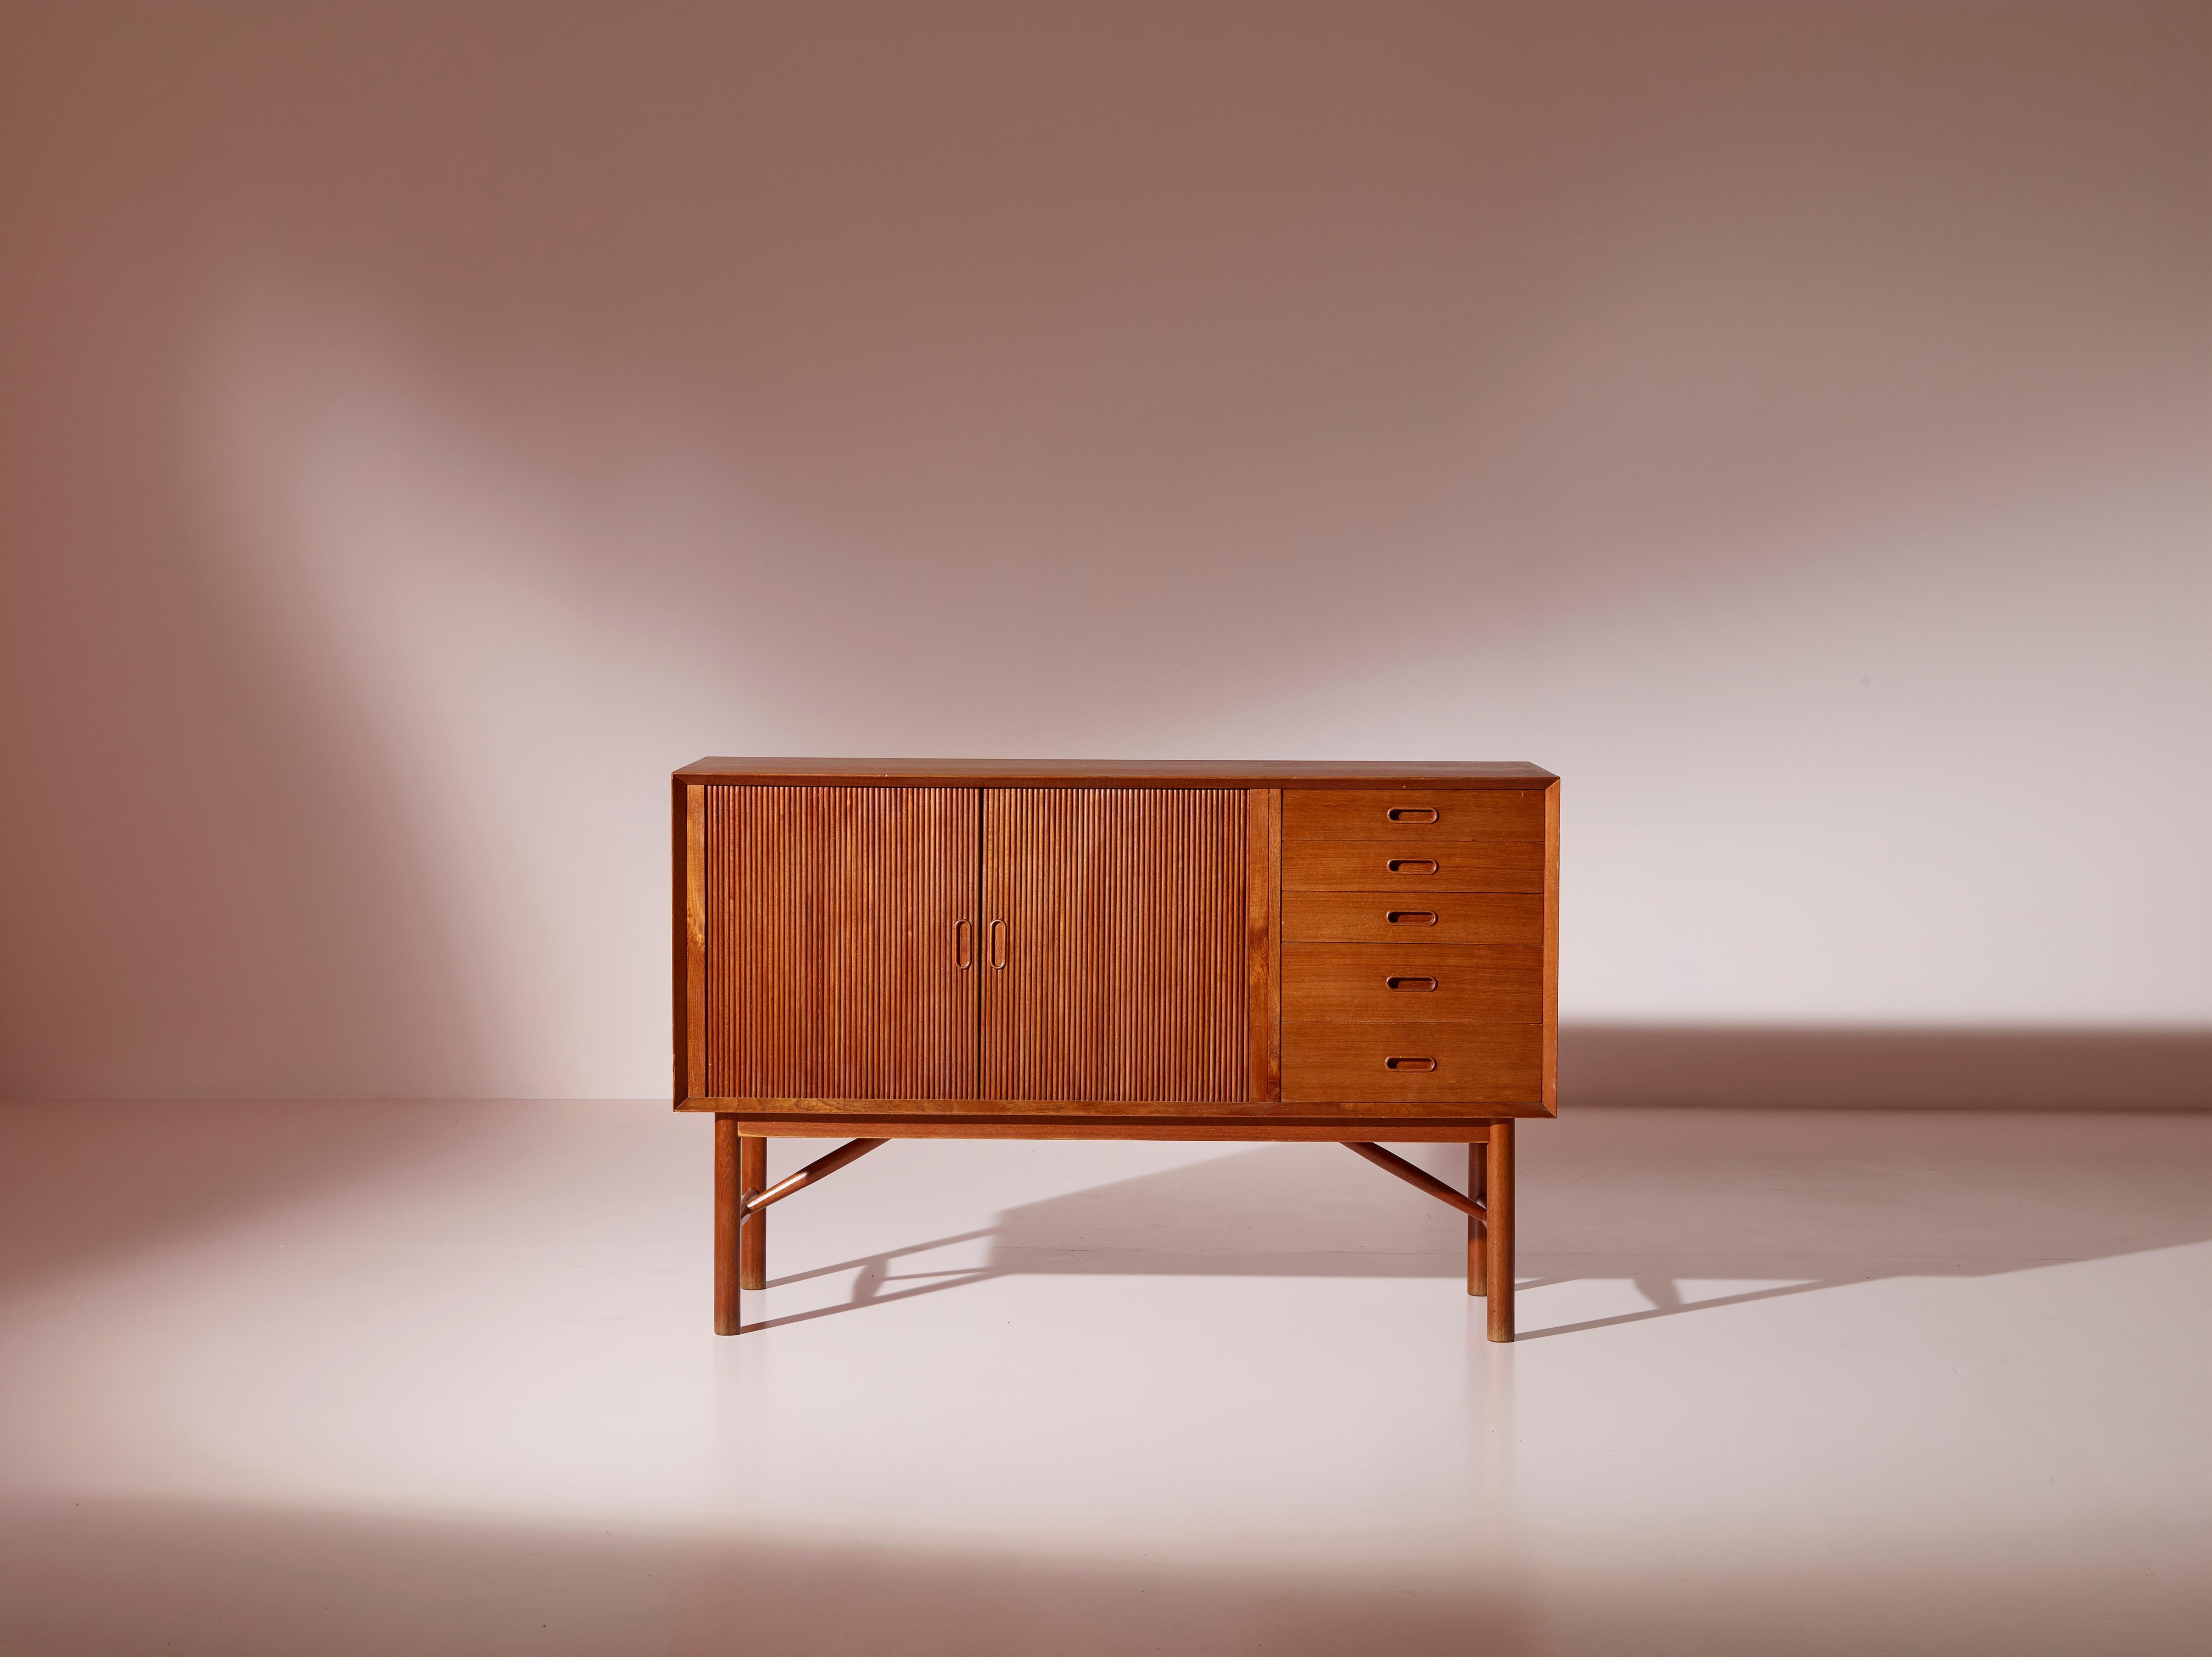 An exquisite sideboard, Model 309C, designed by Peter Hvidt & Orla Mølgaard Nielsen and manufactured by Søborg Møbelfabrik in Denmark during the 1950s. 

Crafted from solid teak wood, the piece has been gently cleaned and restored to its original